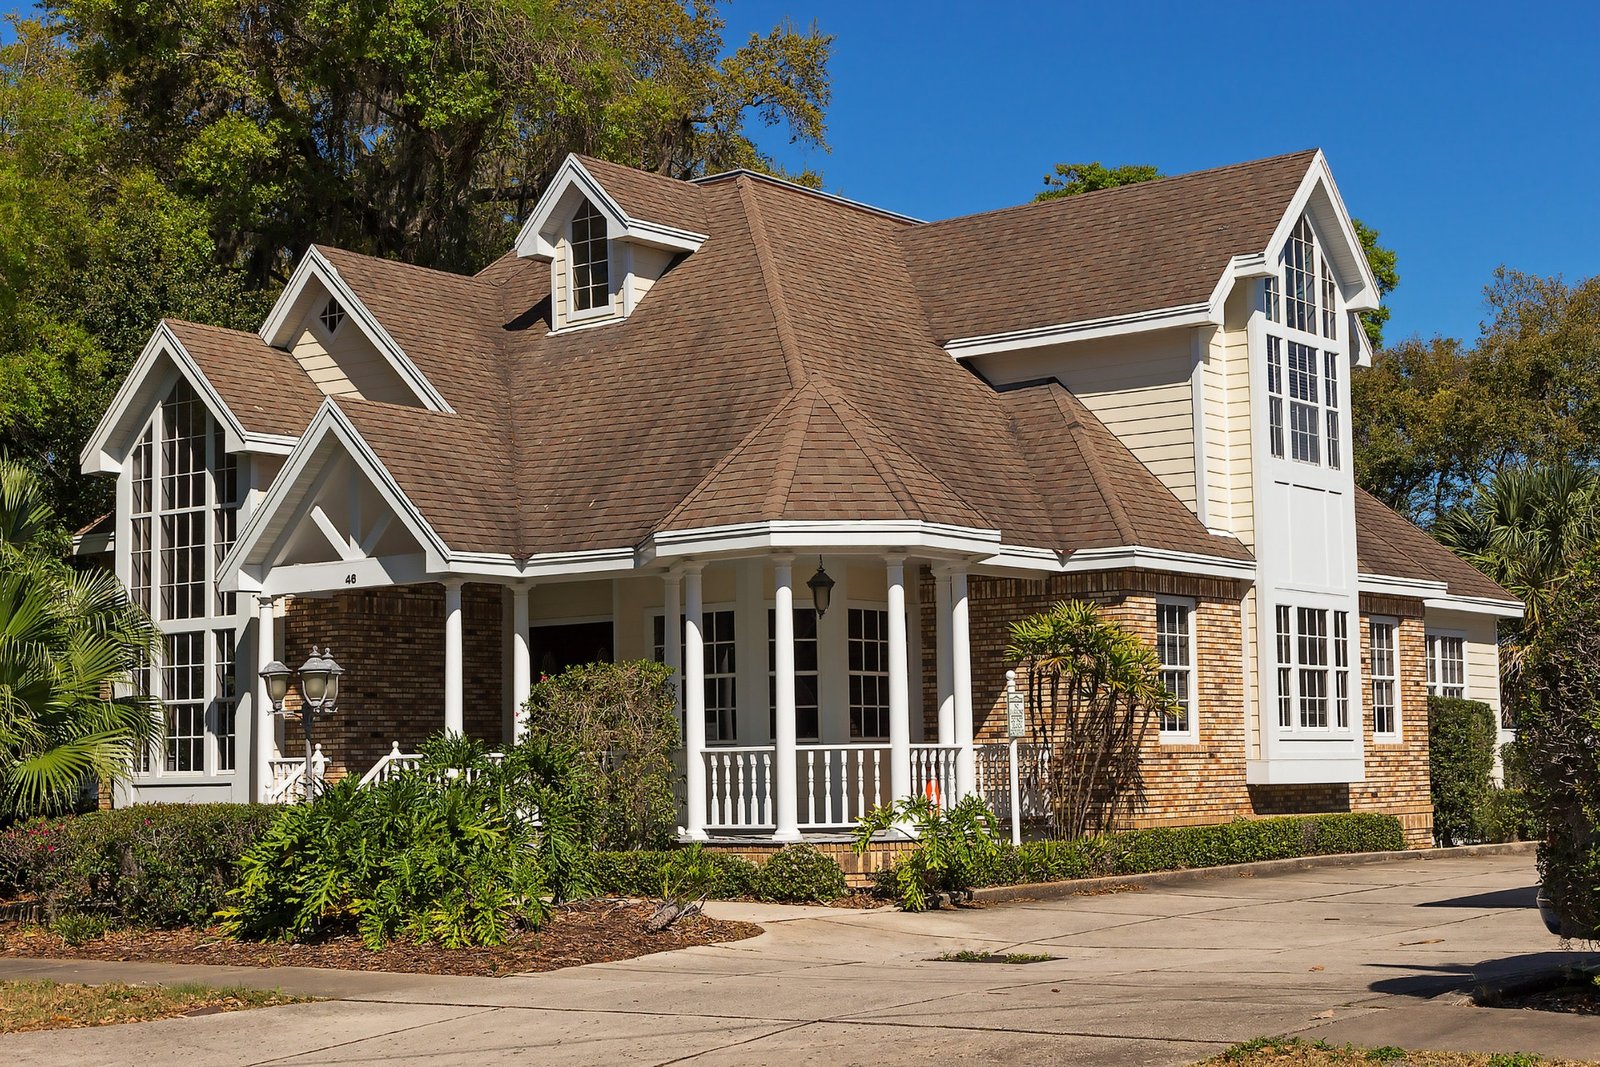 How To Easily Avail The Services Of Driveways Installers?